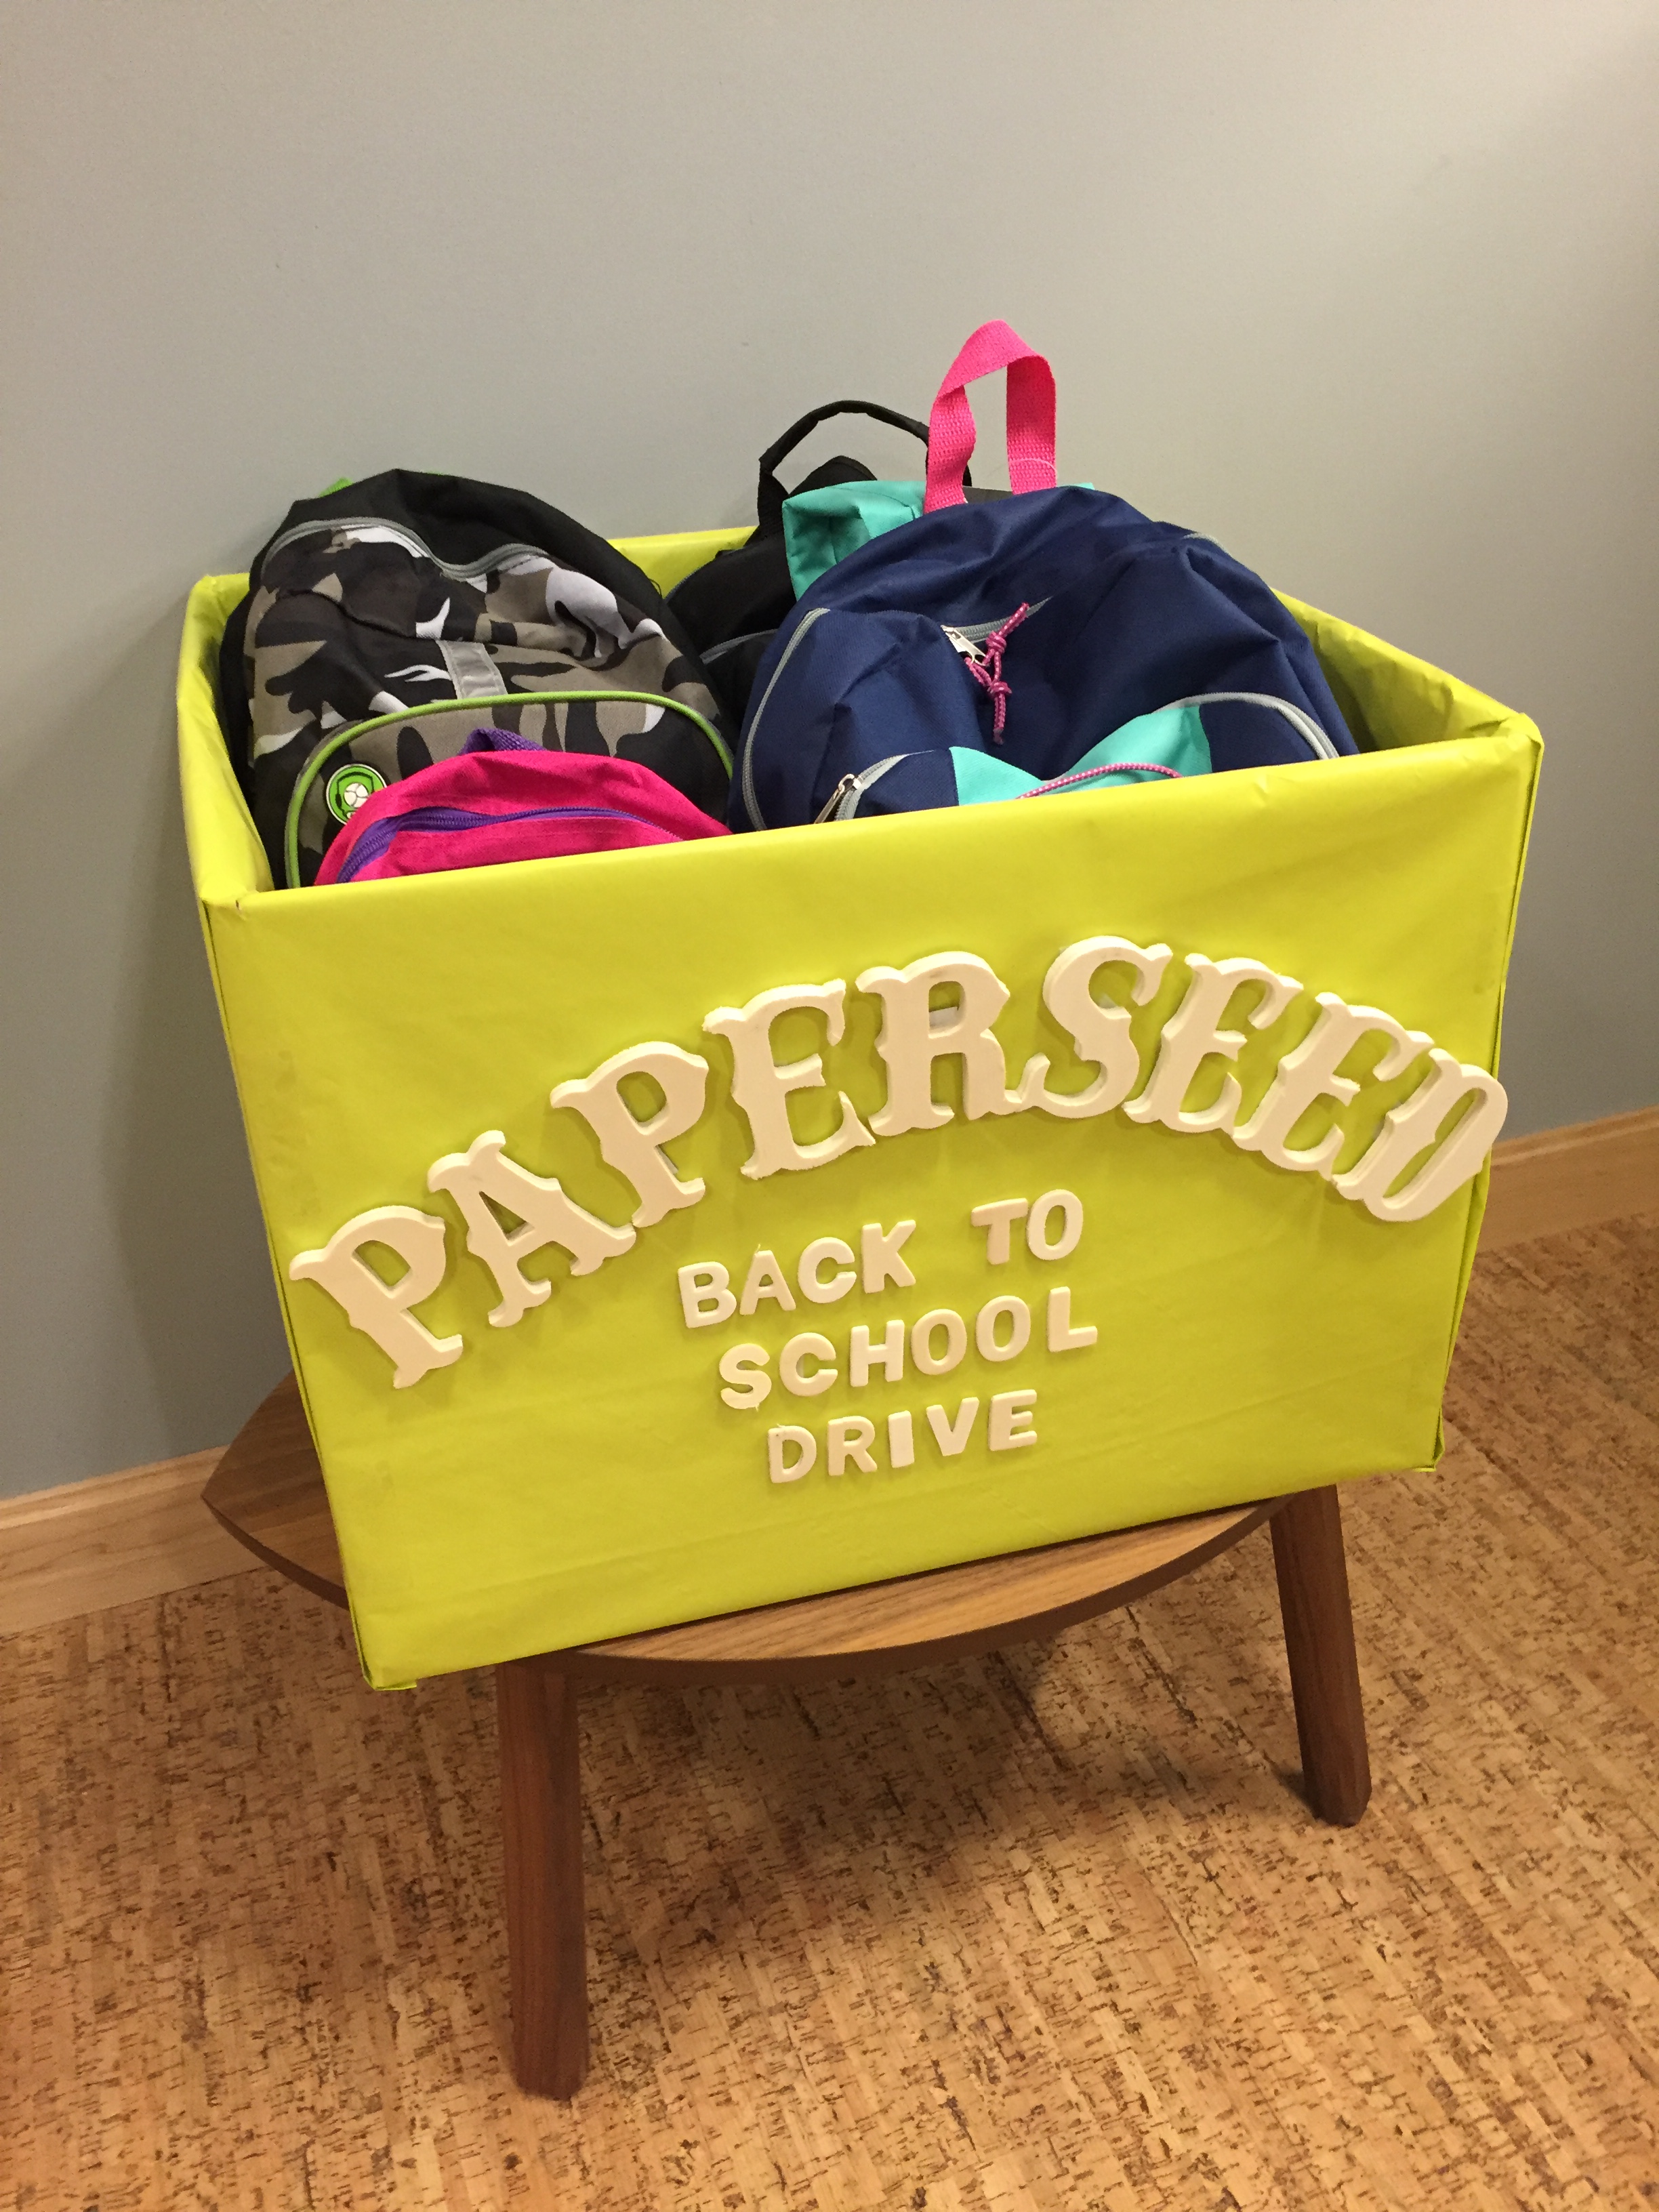  2016 Back-to-School Drive 